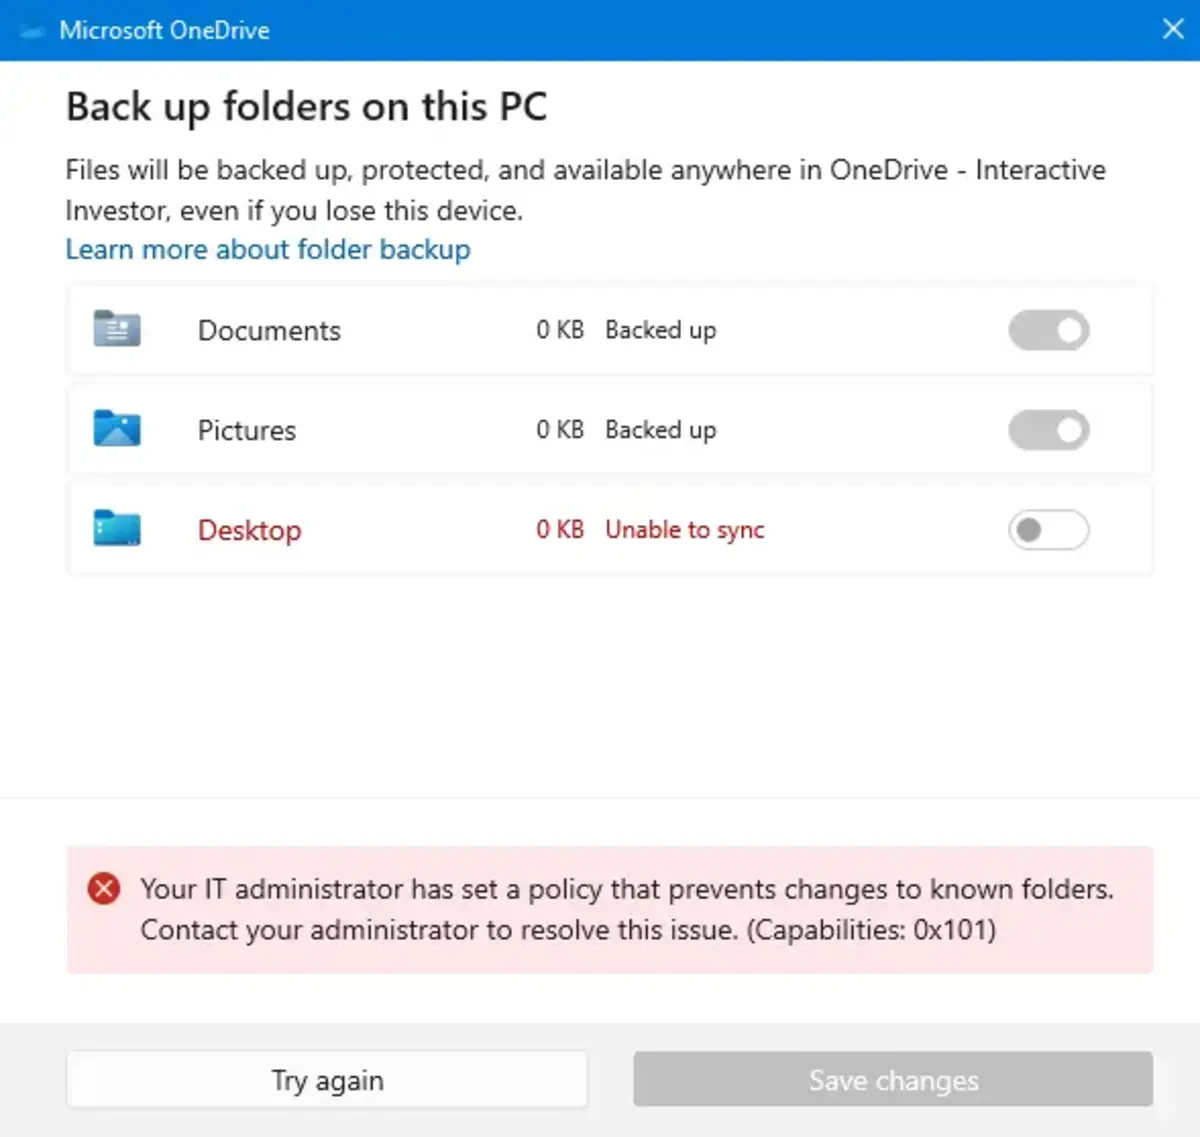 Synch the backup folders for OneDrive